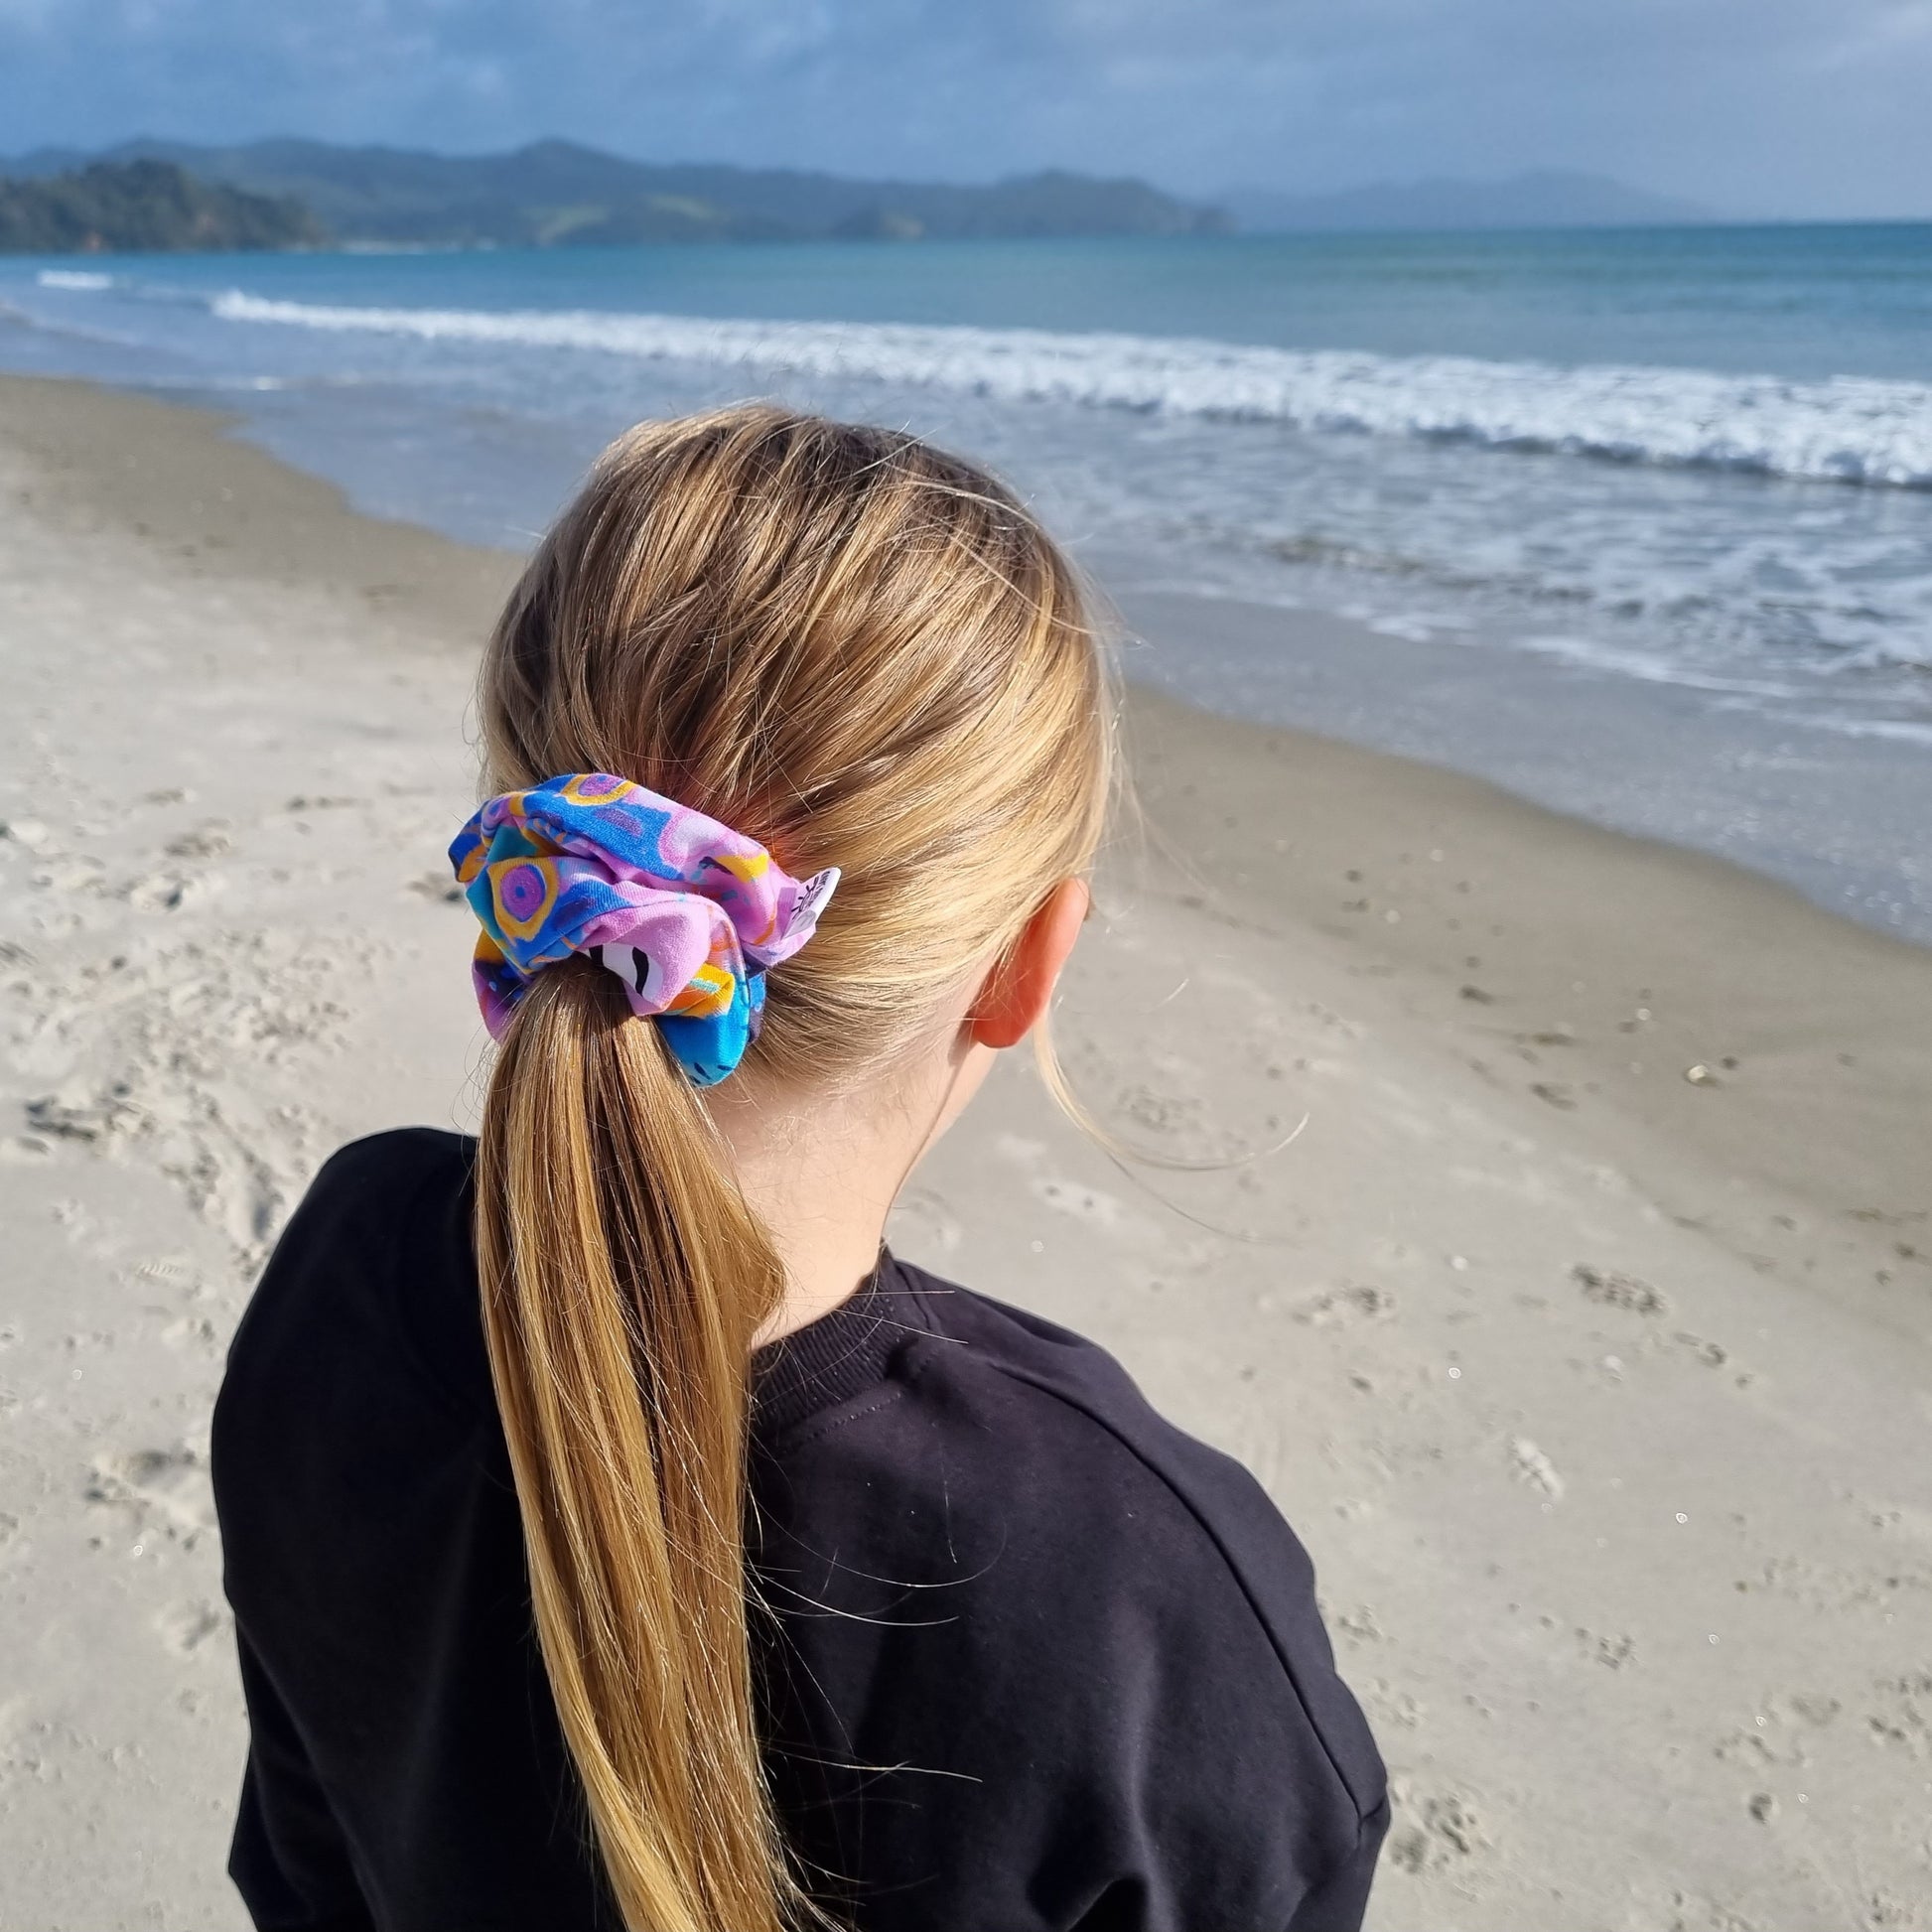 Scrunchie - Swirls tied in girls hair at the beach. Blue, orange and purple abstract pattern on pink background.